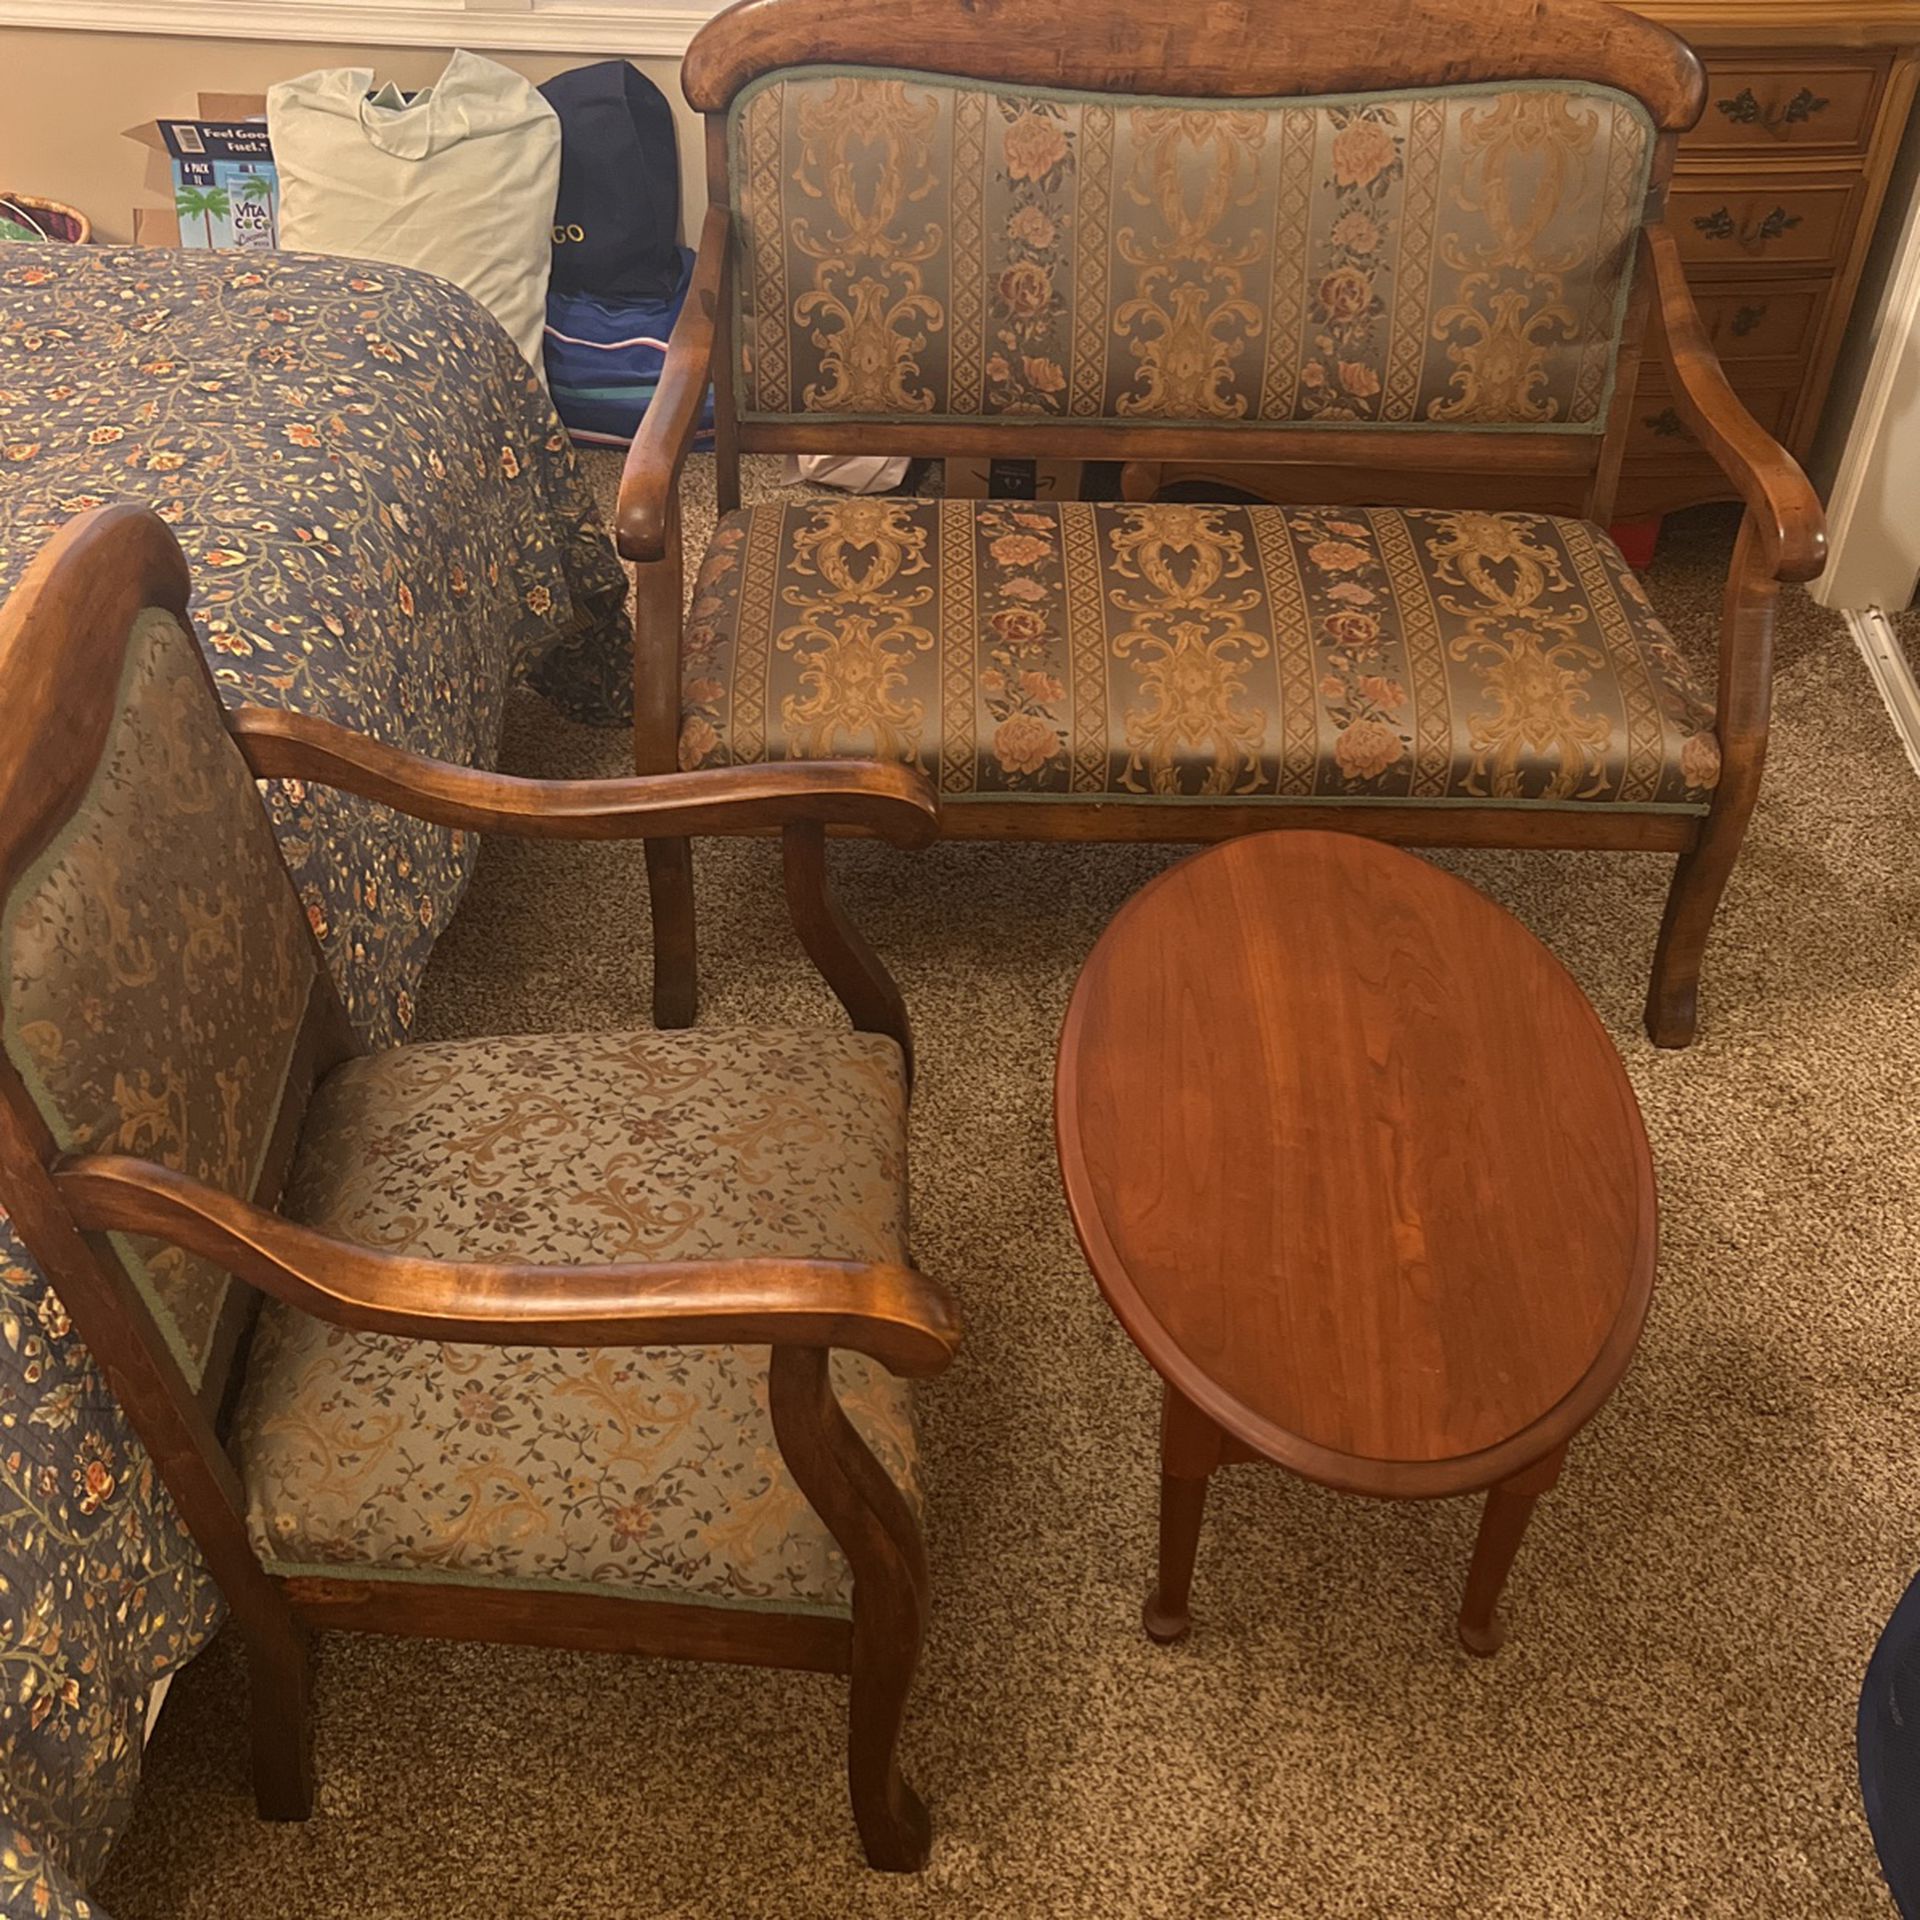 Antique Love Seat, Chair and Table Set